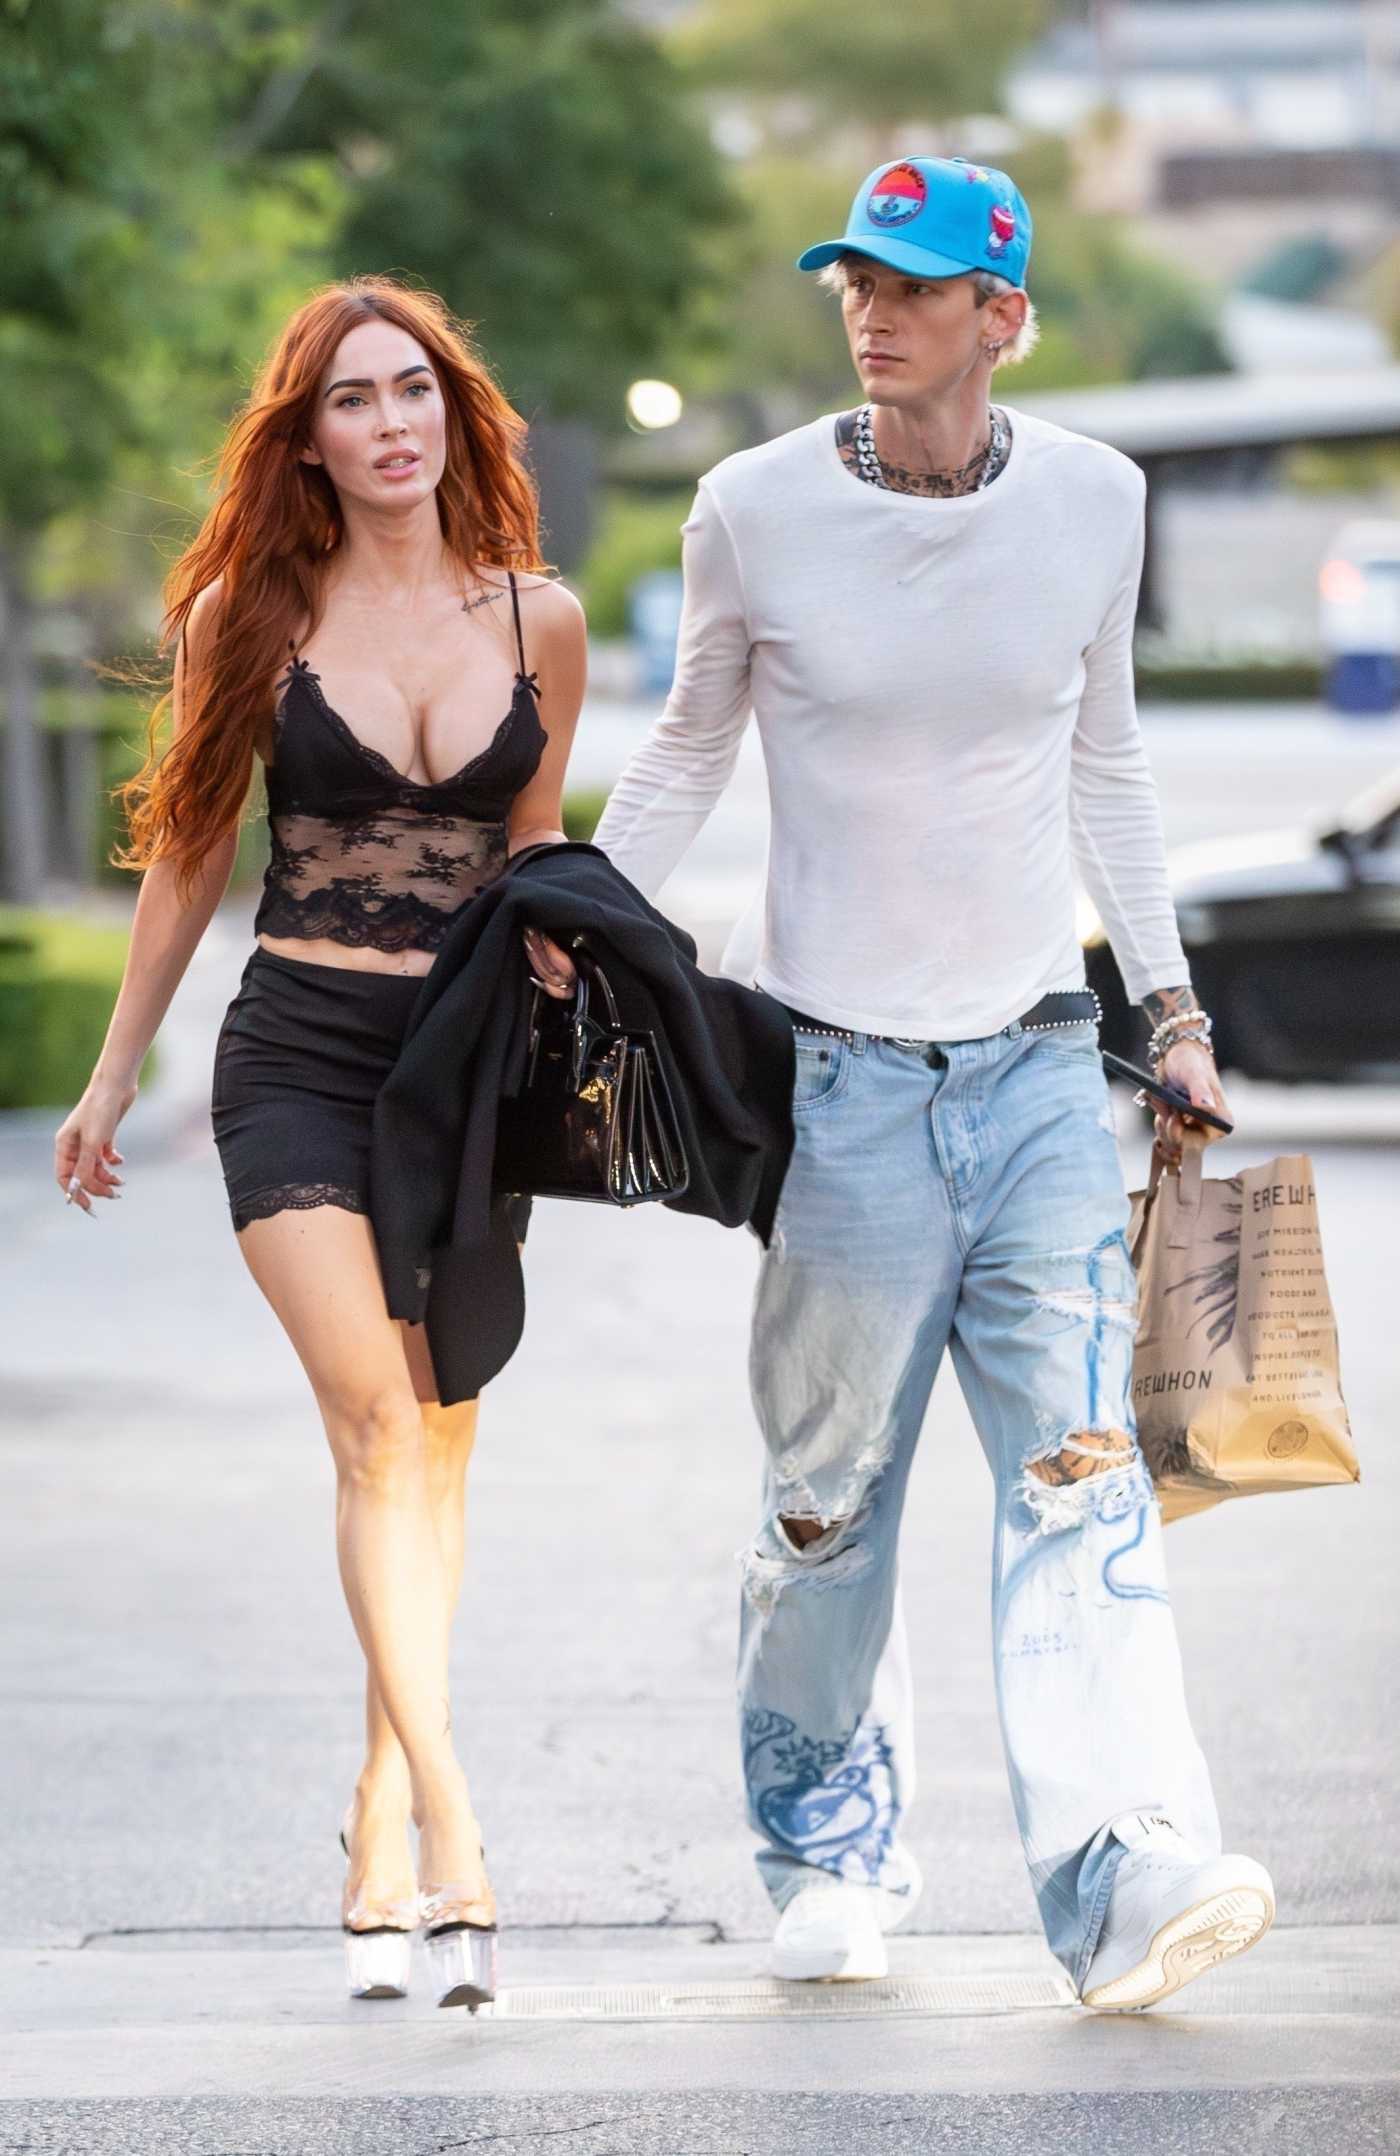 Megan Fox in a Black Lingerie Top Was Seen Out with Machine Gun Kelly in Calabasas 07/16/2023